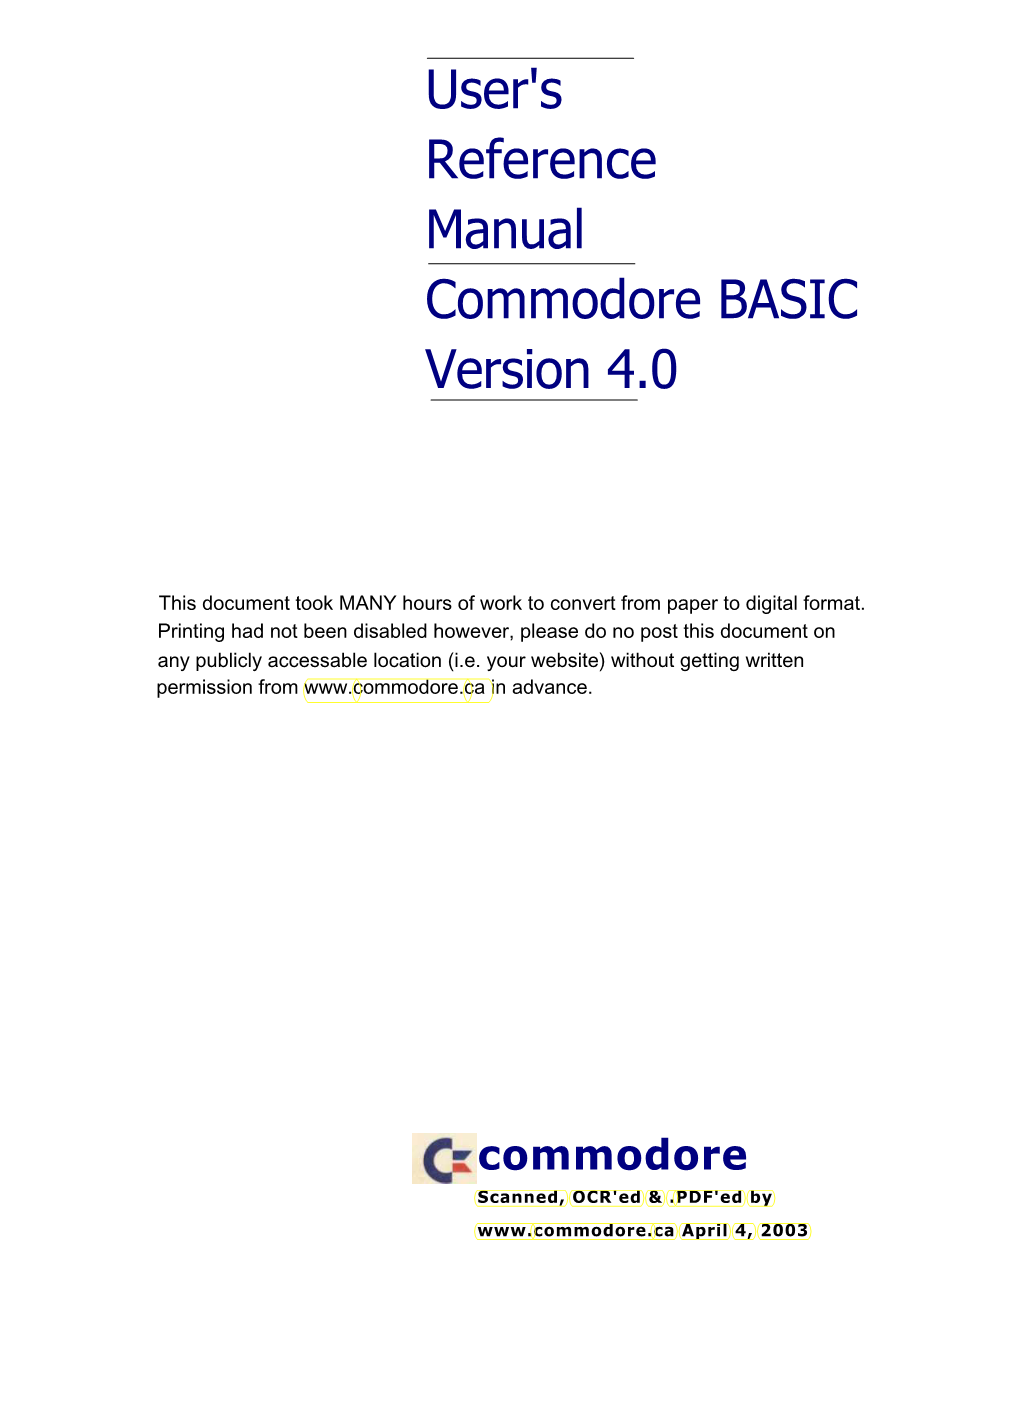 User's Reference Manual Commodore BASIC Version 4.0